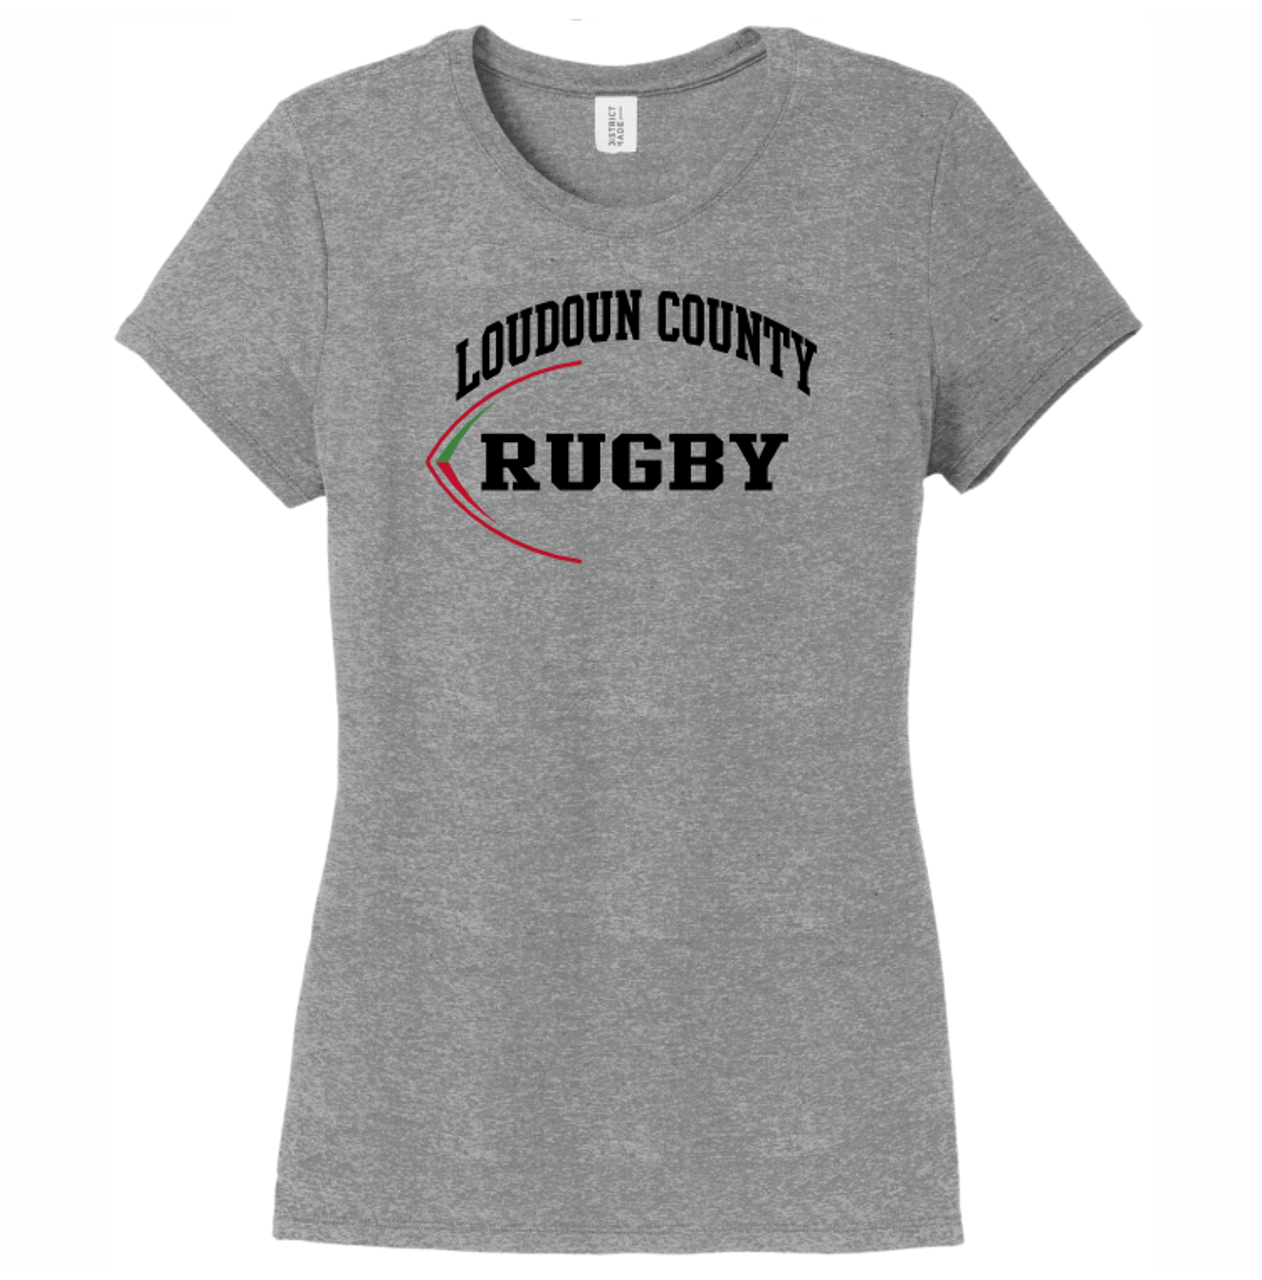 Loudoun Rugby Triblend Tee, Gray Frost